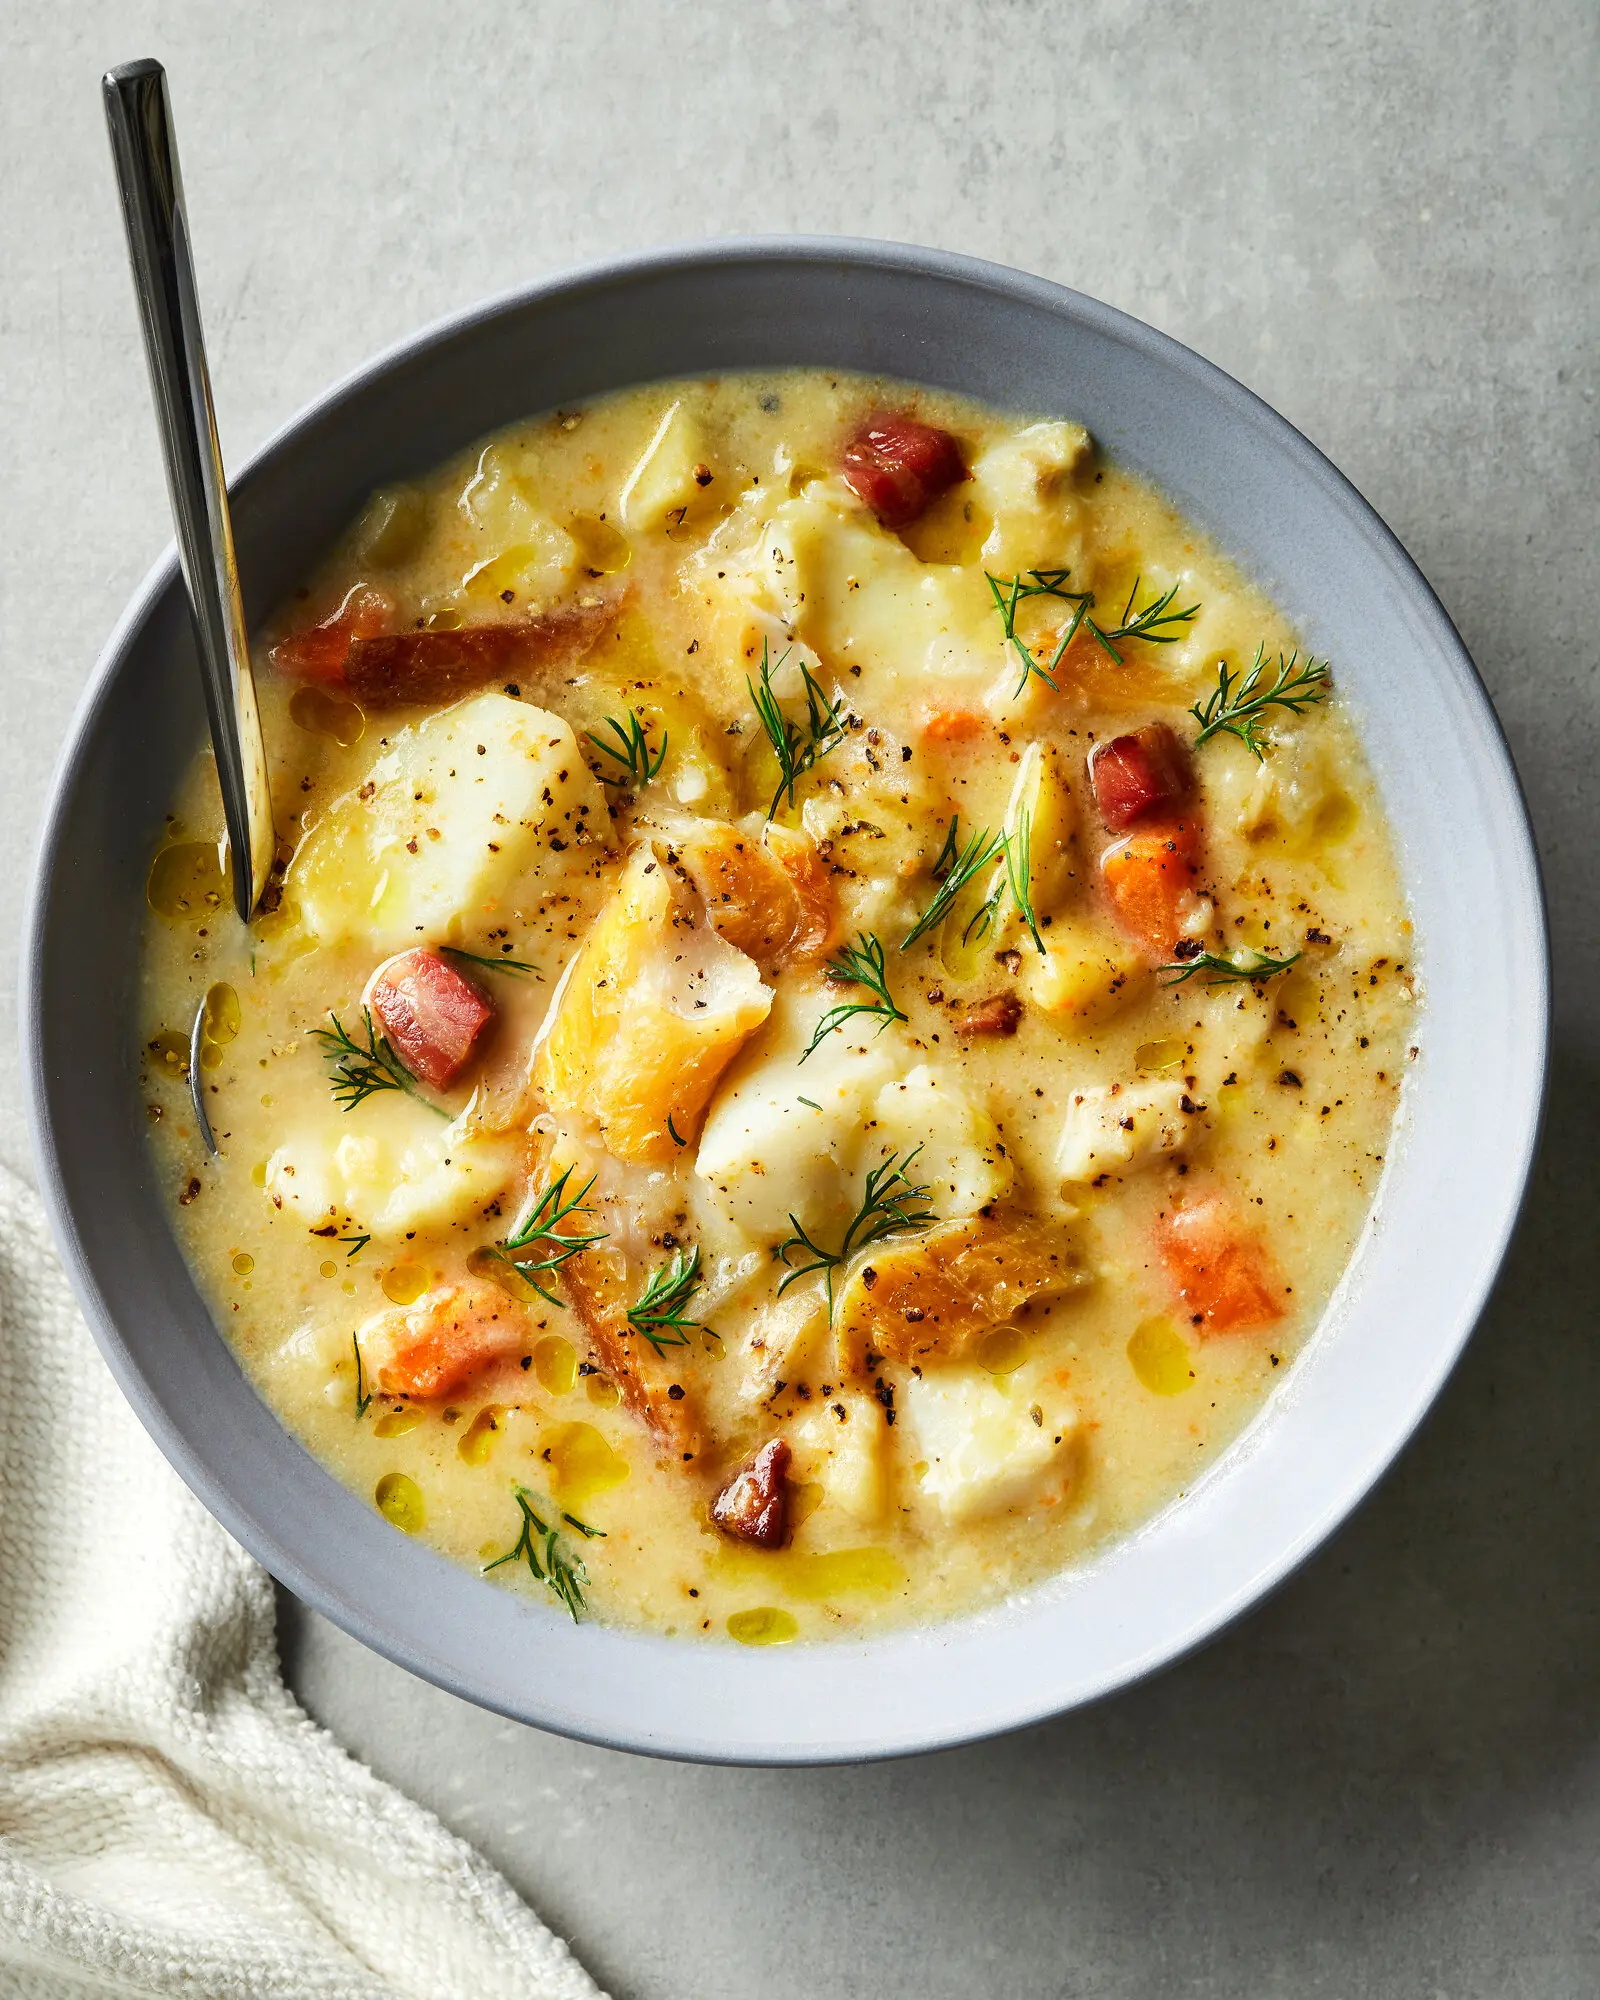 smoked chowder - Why is it called chowder